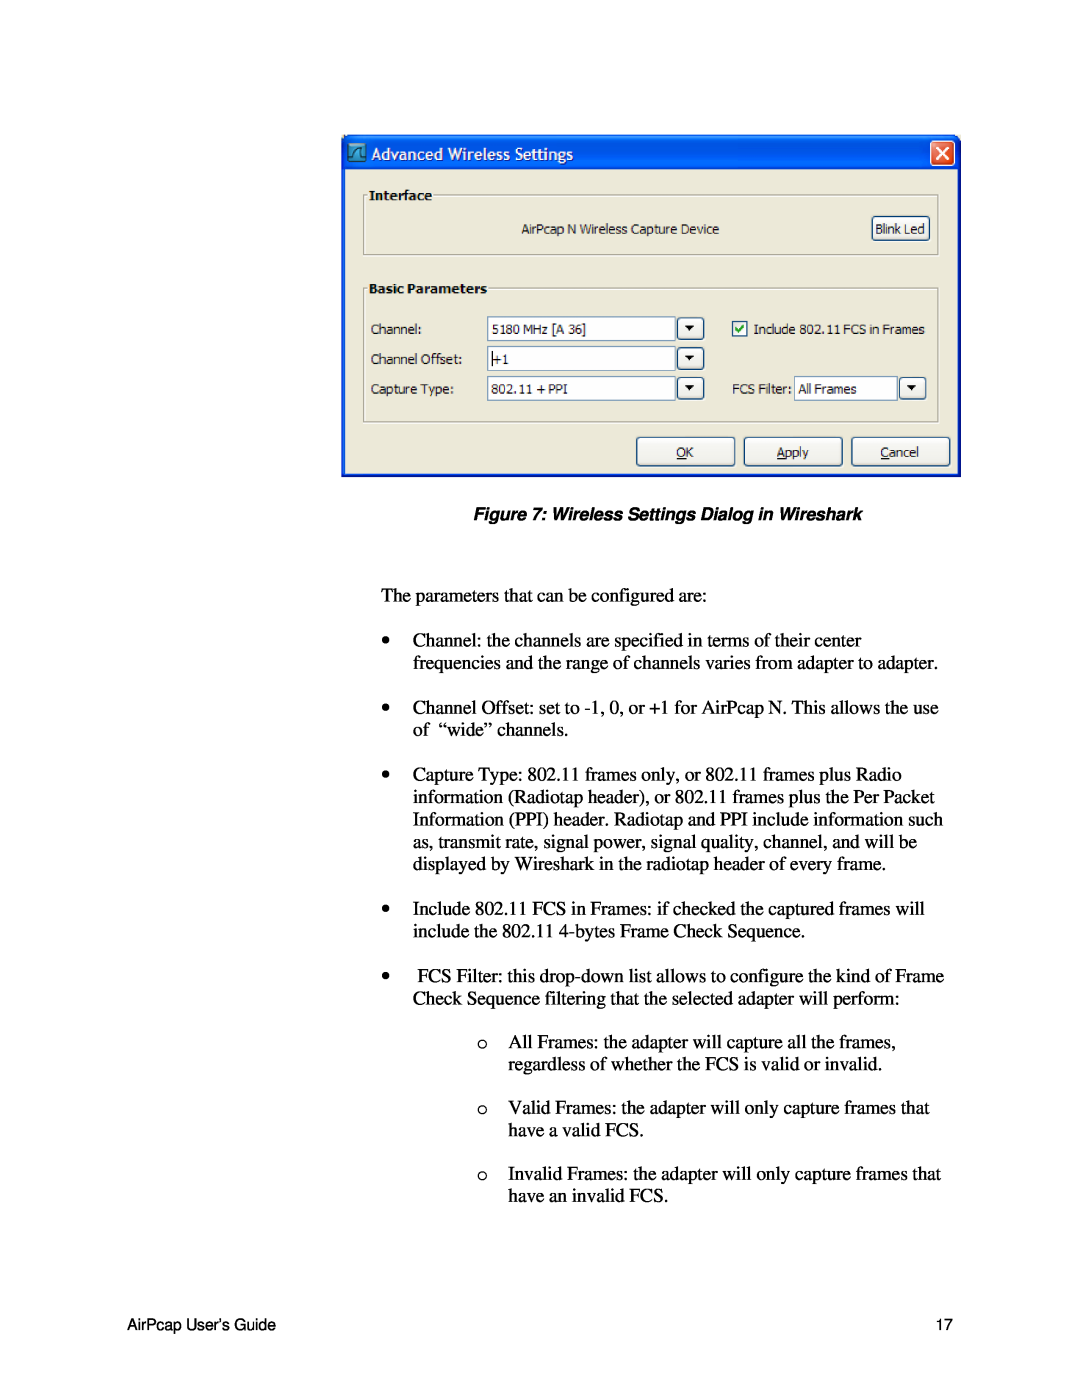 Cace Technologies AirPcap Wireless Capture Adapters manual Wireless Settings Dialog in Wireshark 